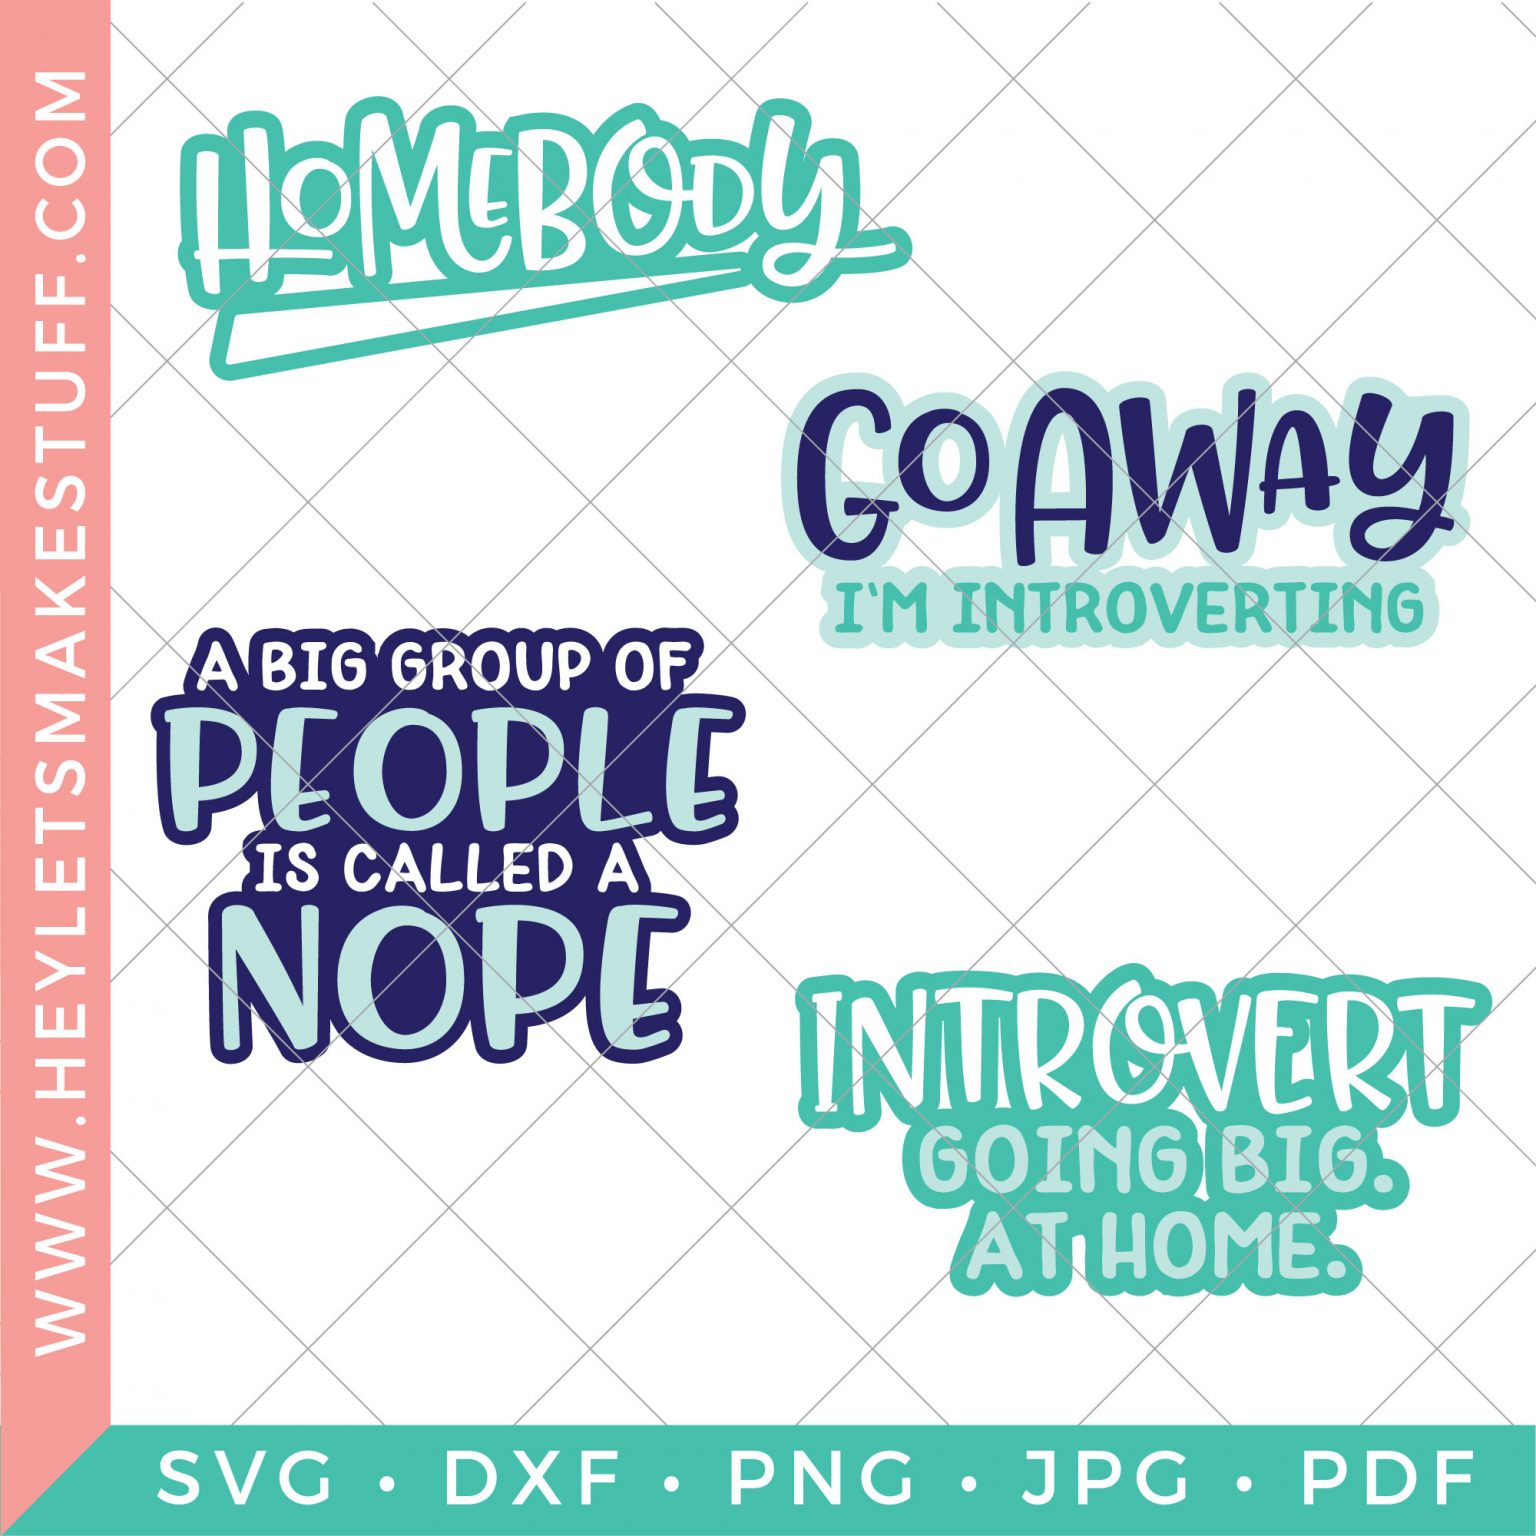 Download Homebody and Introvert SVG Bundle - Hey Let's Make Stuff